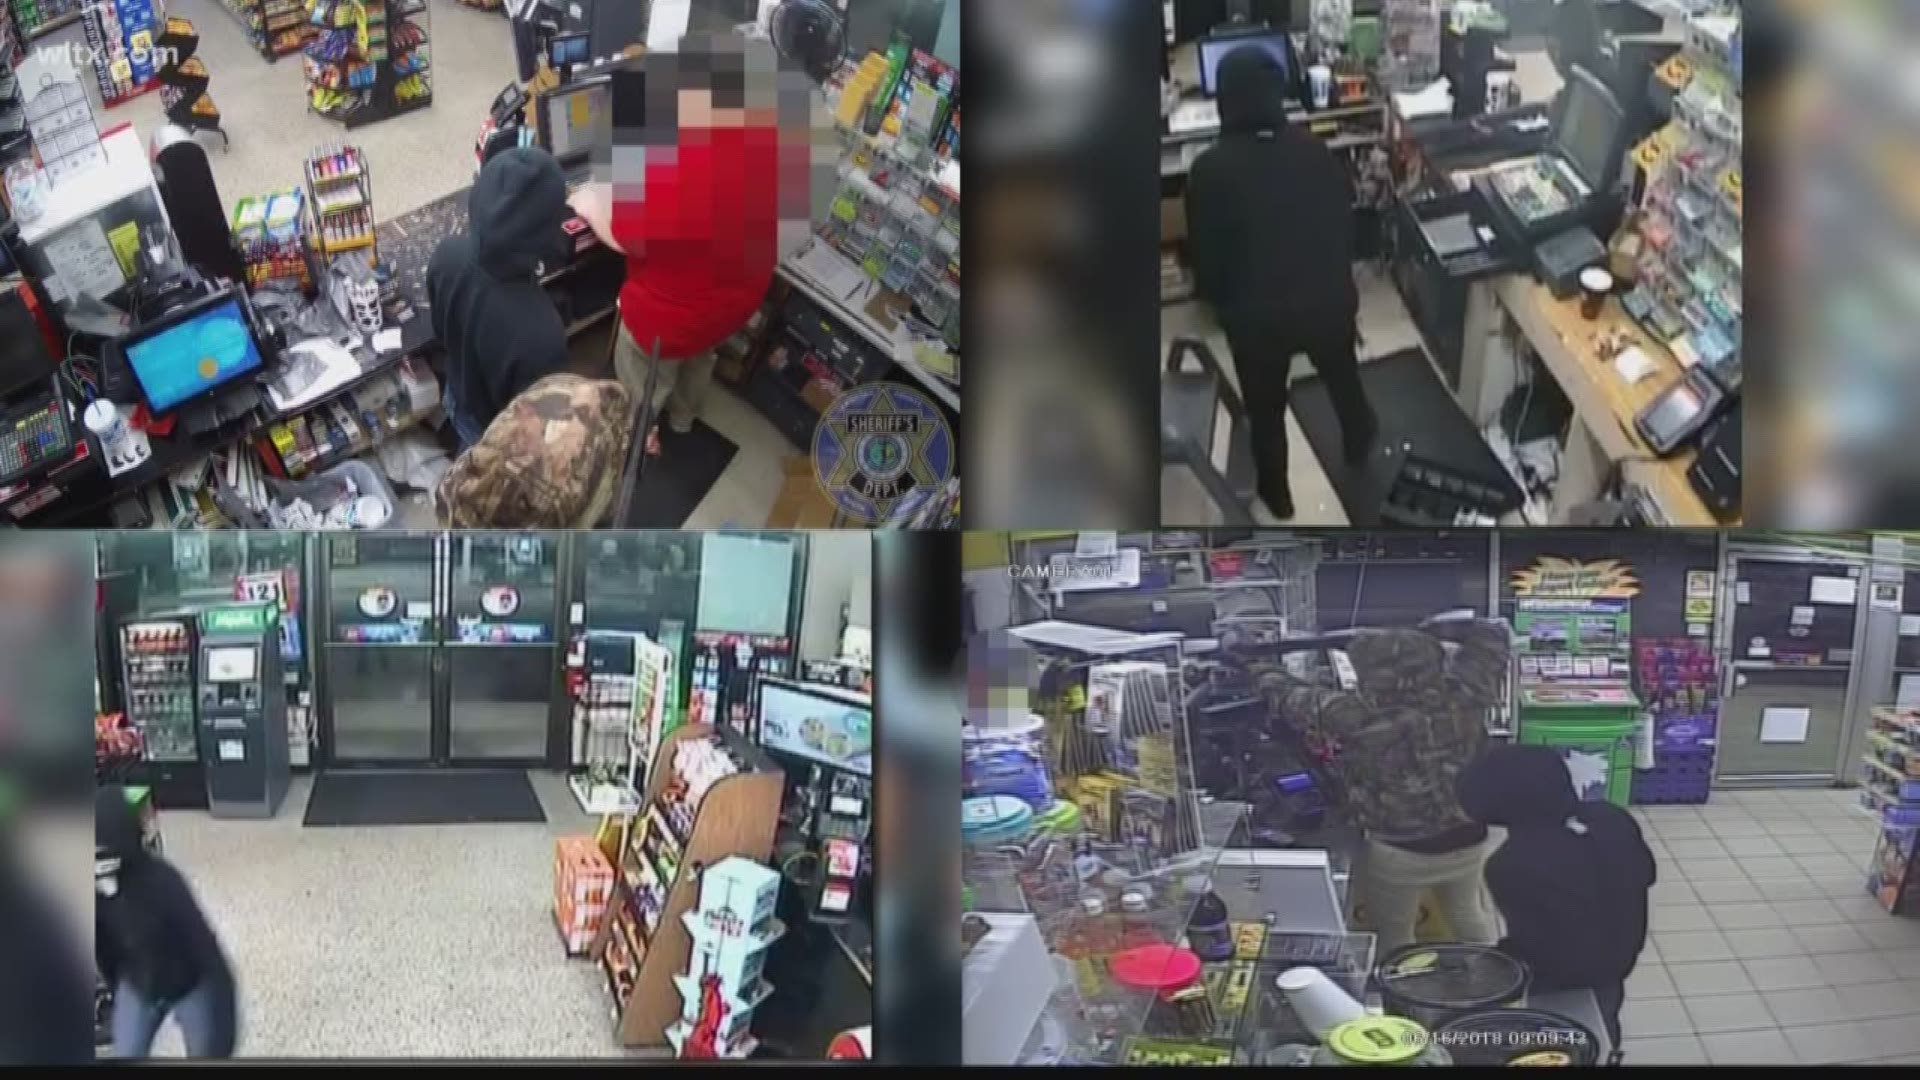 Local law enforcement needs your help in identifying two people involved in a string of armed robberies in Lexington and Richland counties